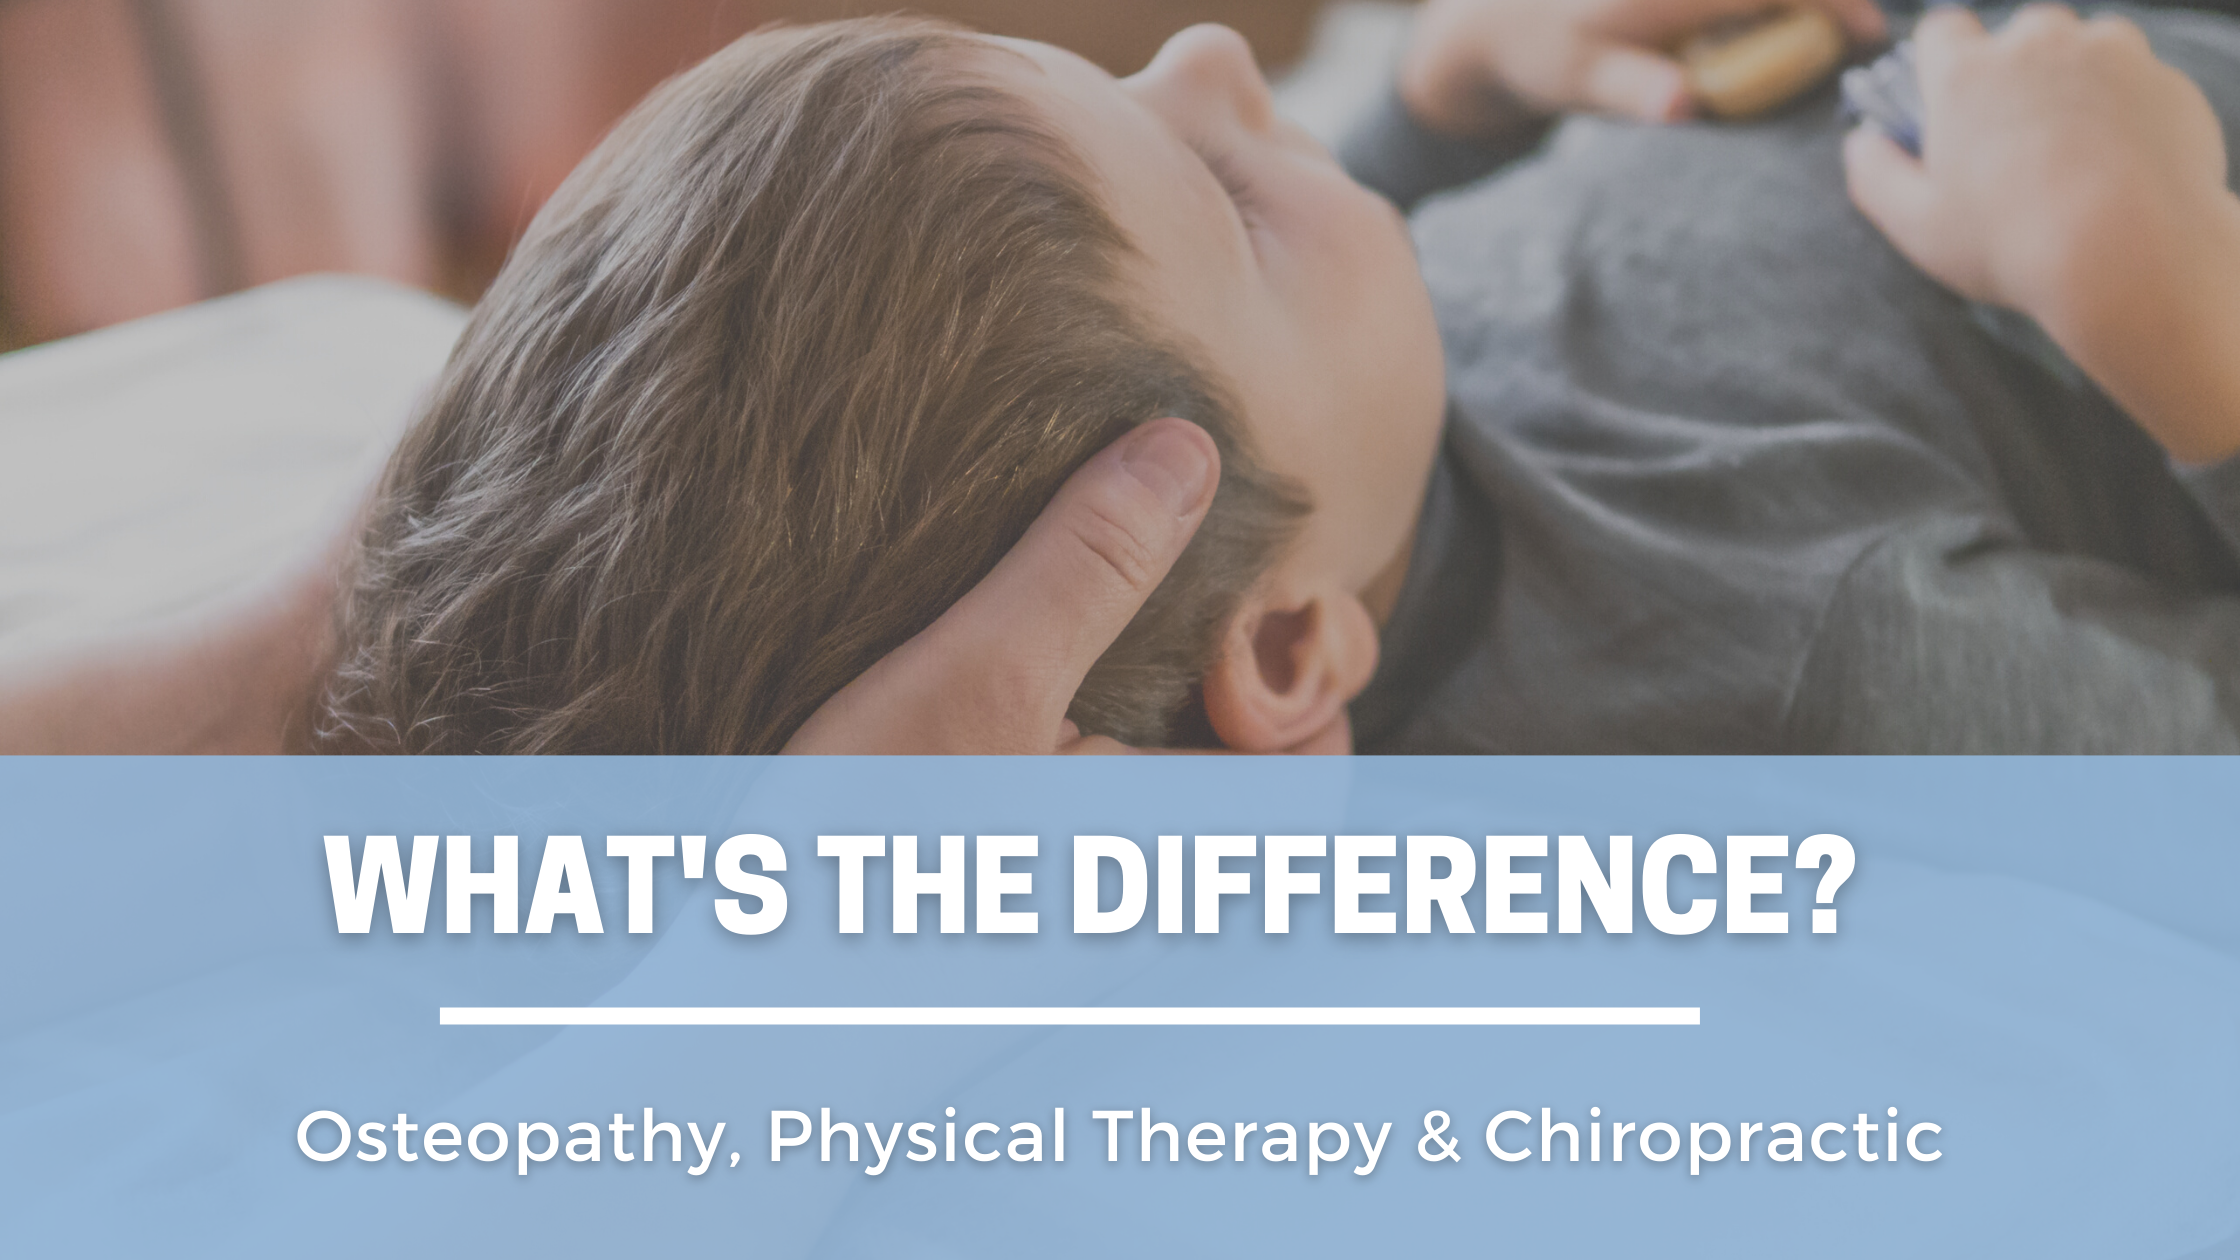 chiropractor holding a child's head text what's the difference osteopathy and physical therapy